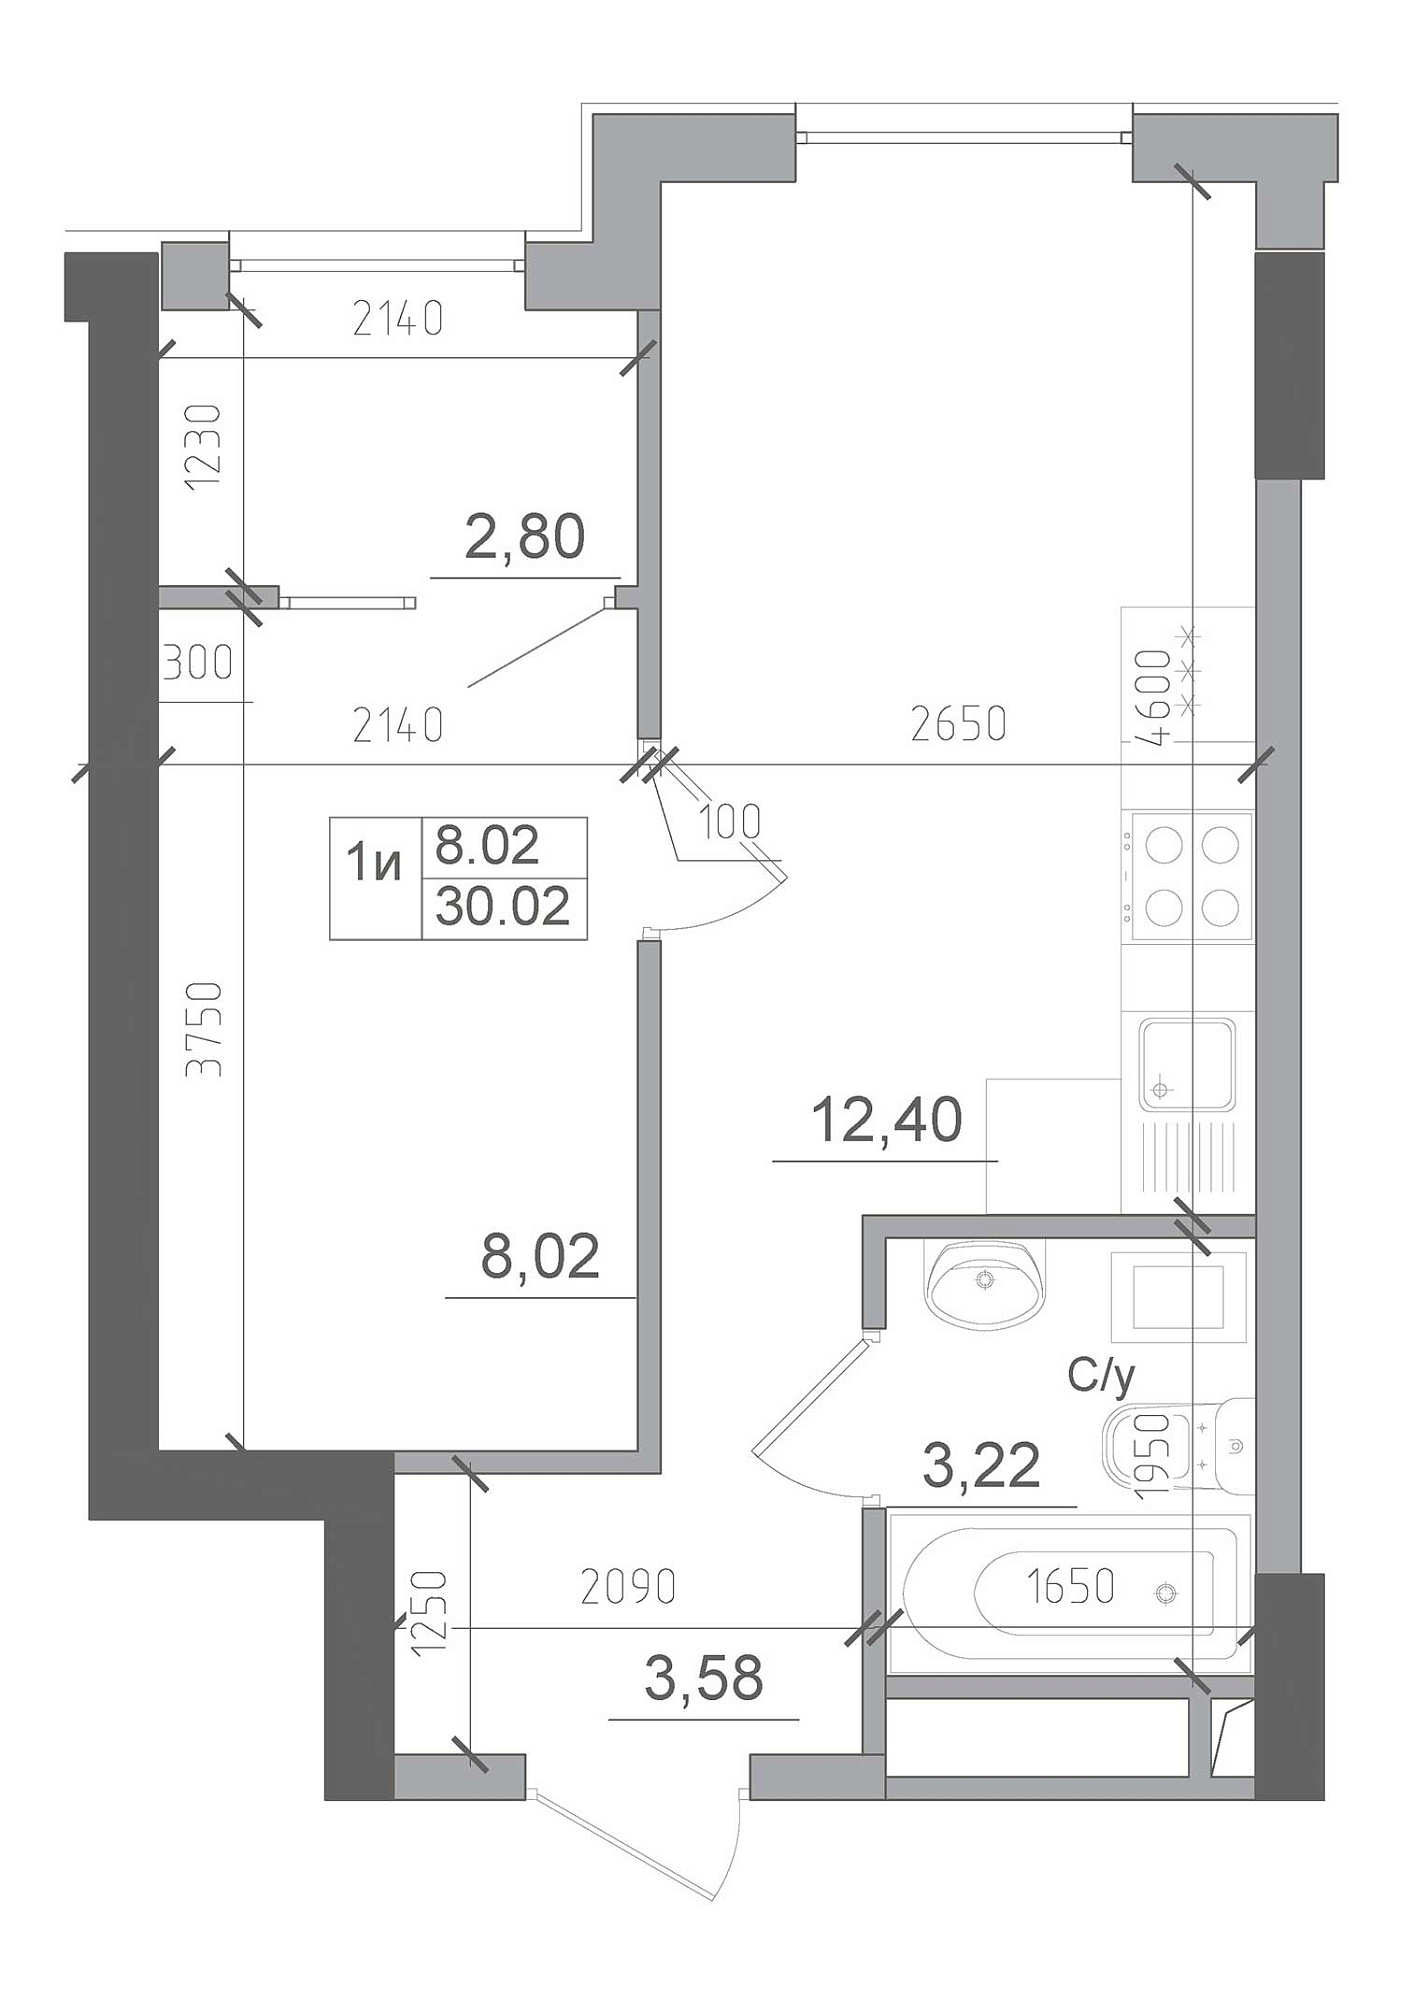 Planning 1-rm flats area 30.02m2, AB-22-09/00014.